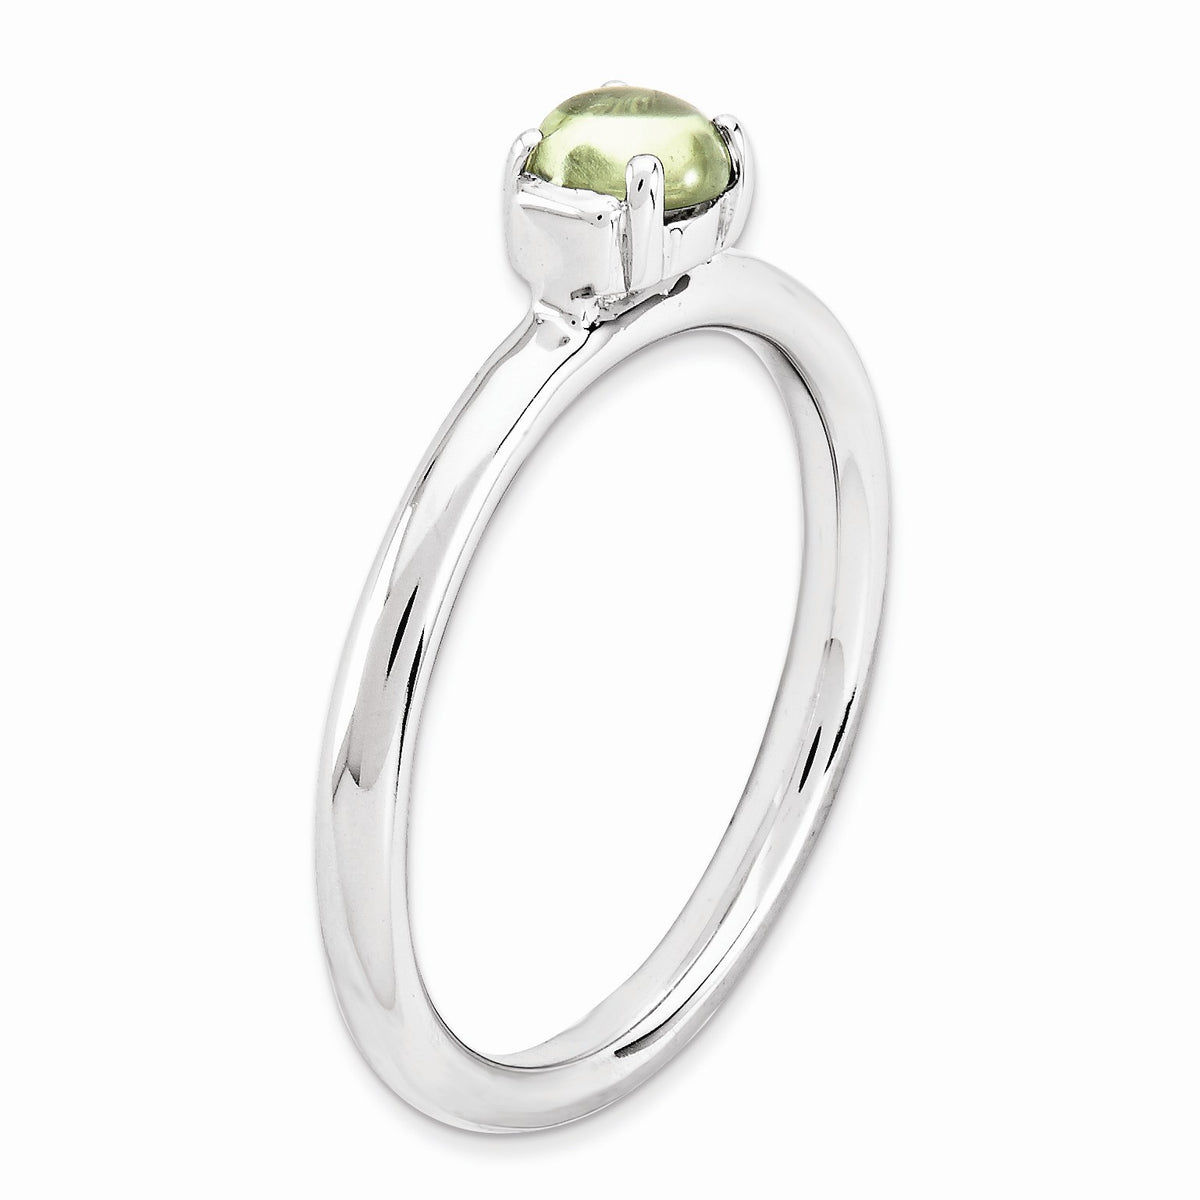 Alternate view of the Silver Stackable 1/2 Carat Peridot Cabochon Ring by The Black Bow Jewelry Co.